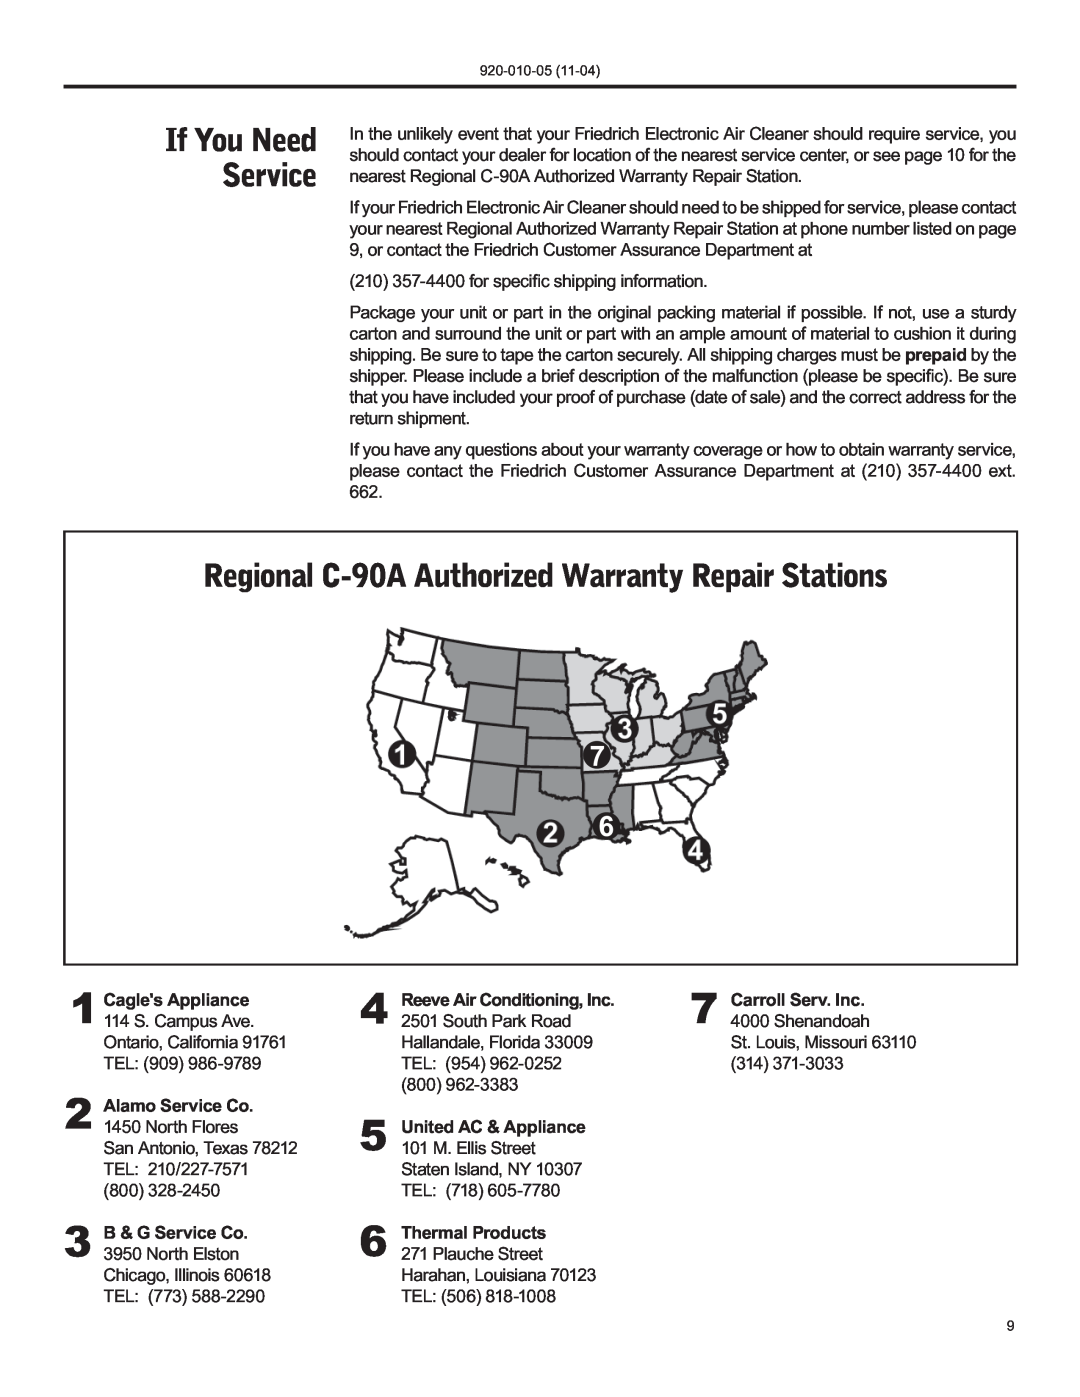 Nilfisk-ALTO Regional C-90AAuthorized Warranty Repair Stations, If You Need Service, Cagles Appliance, Alamo Service Co 